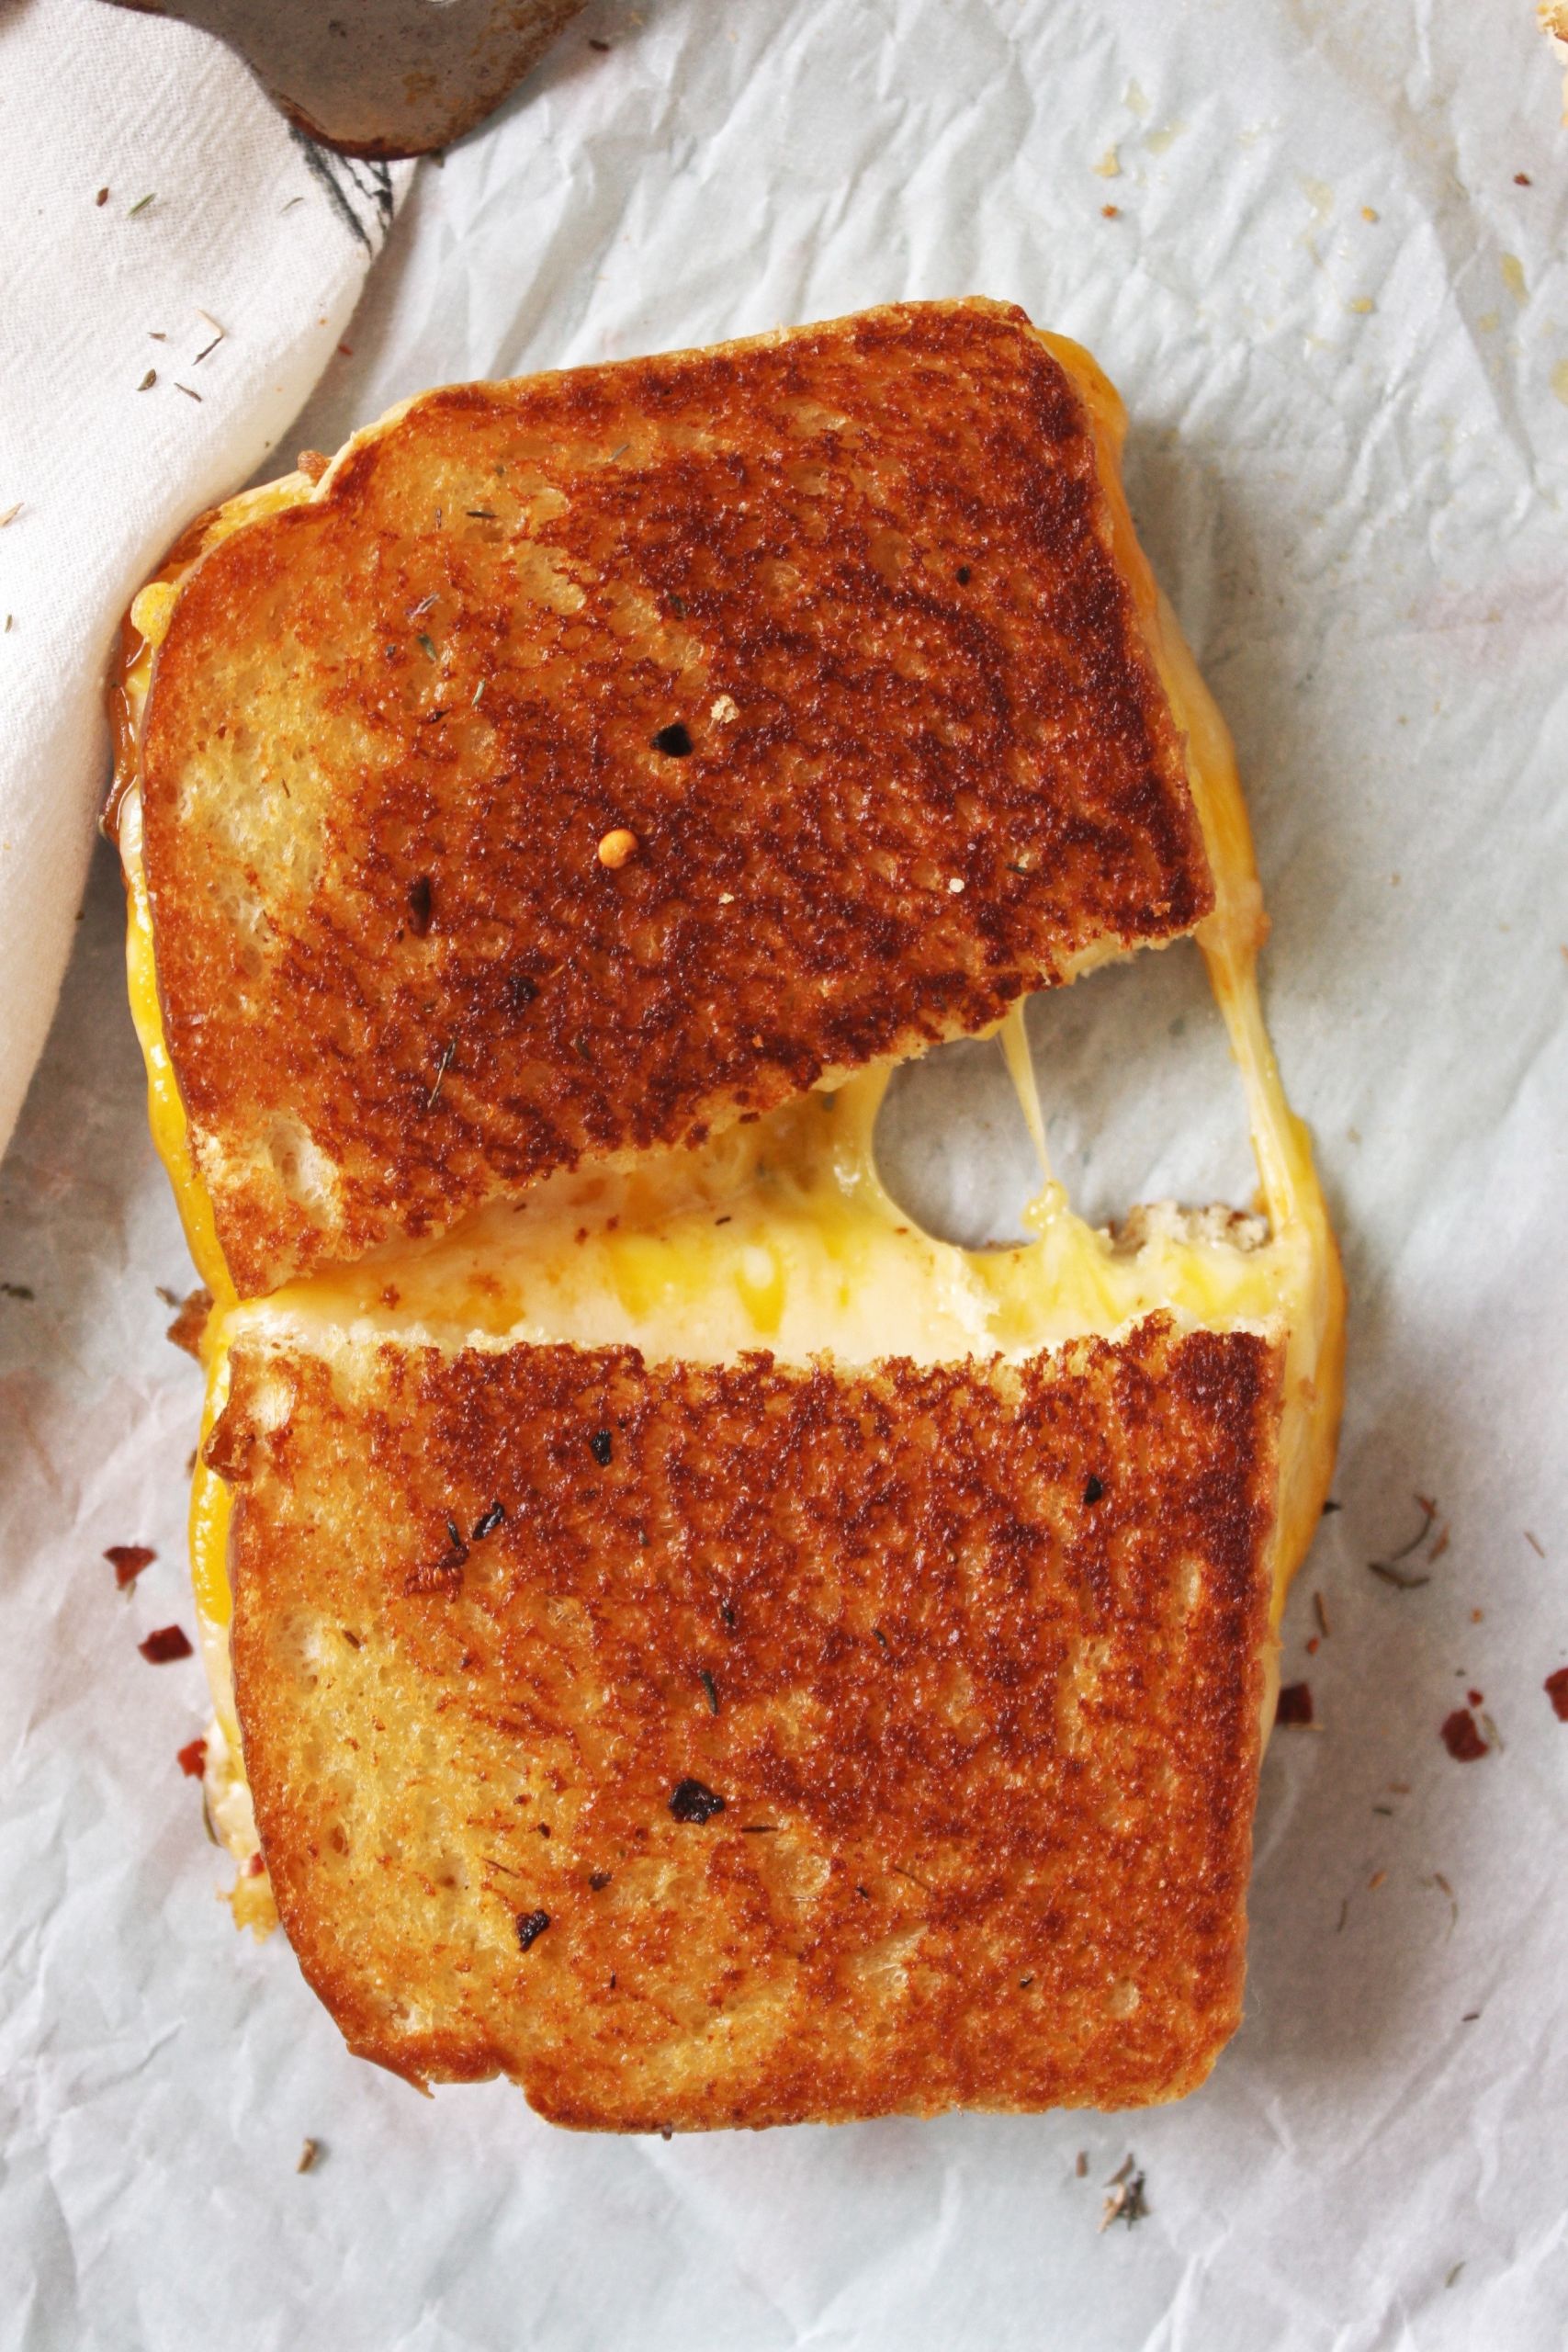 Best Cheese For Grilled Cheese Sandwiches
 Fancy Schmancy Grilled Cheese